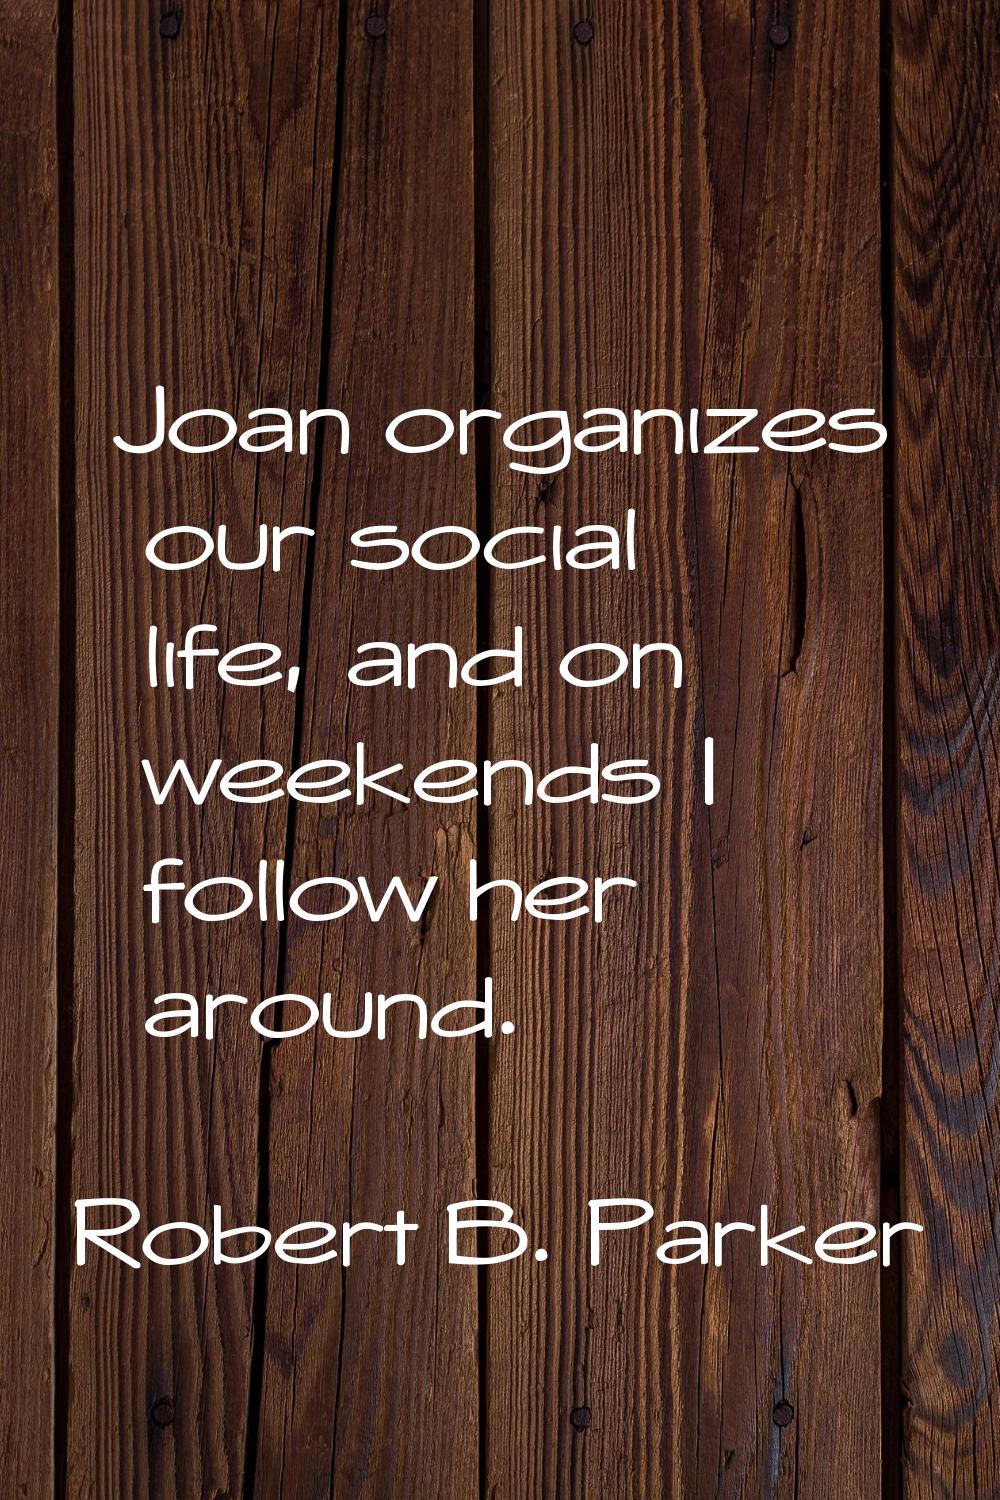 Joan organizes our social life, and on weekends I follow her around.